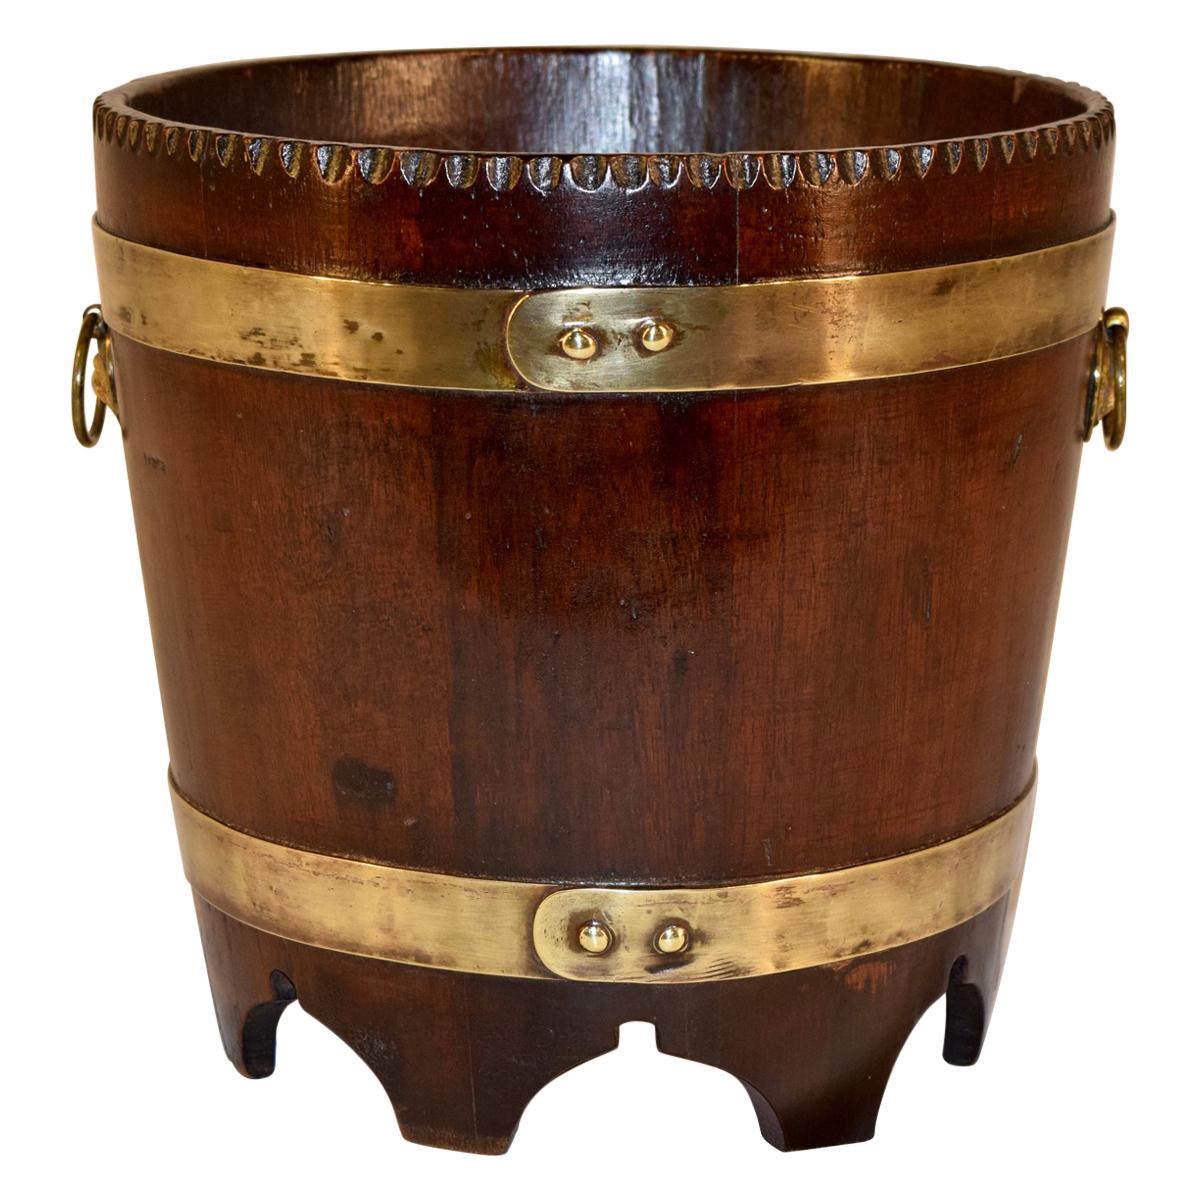 19th Century English Strapped Bucket